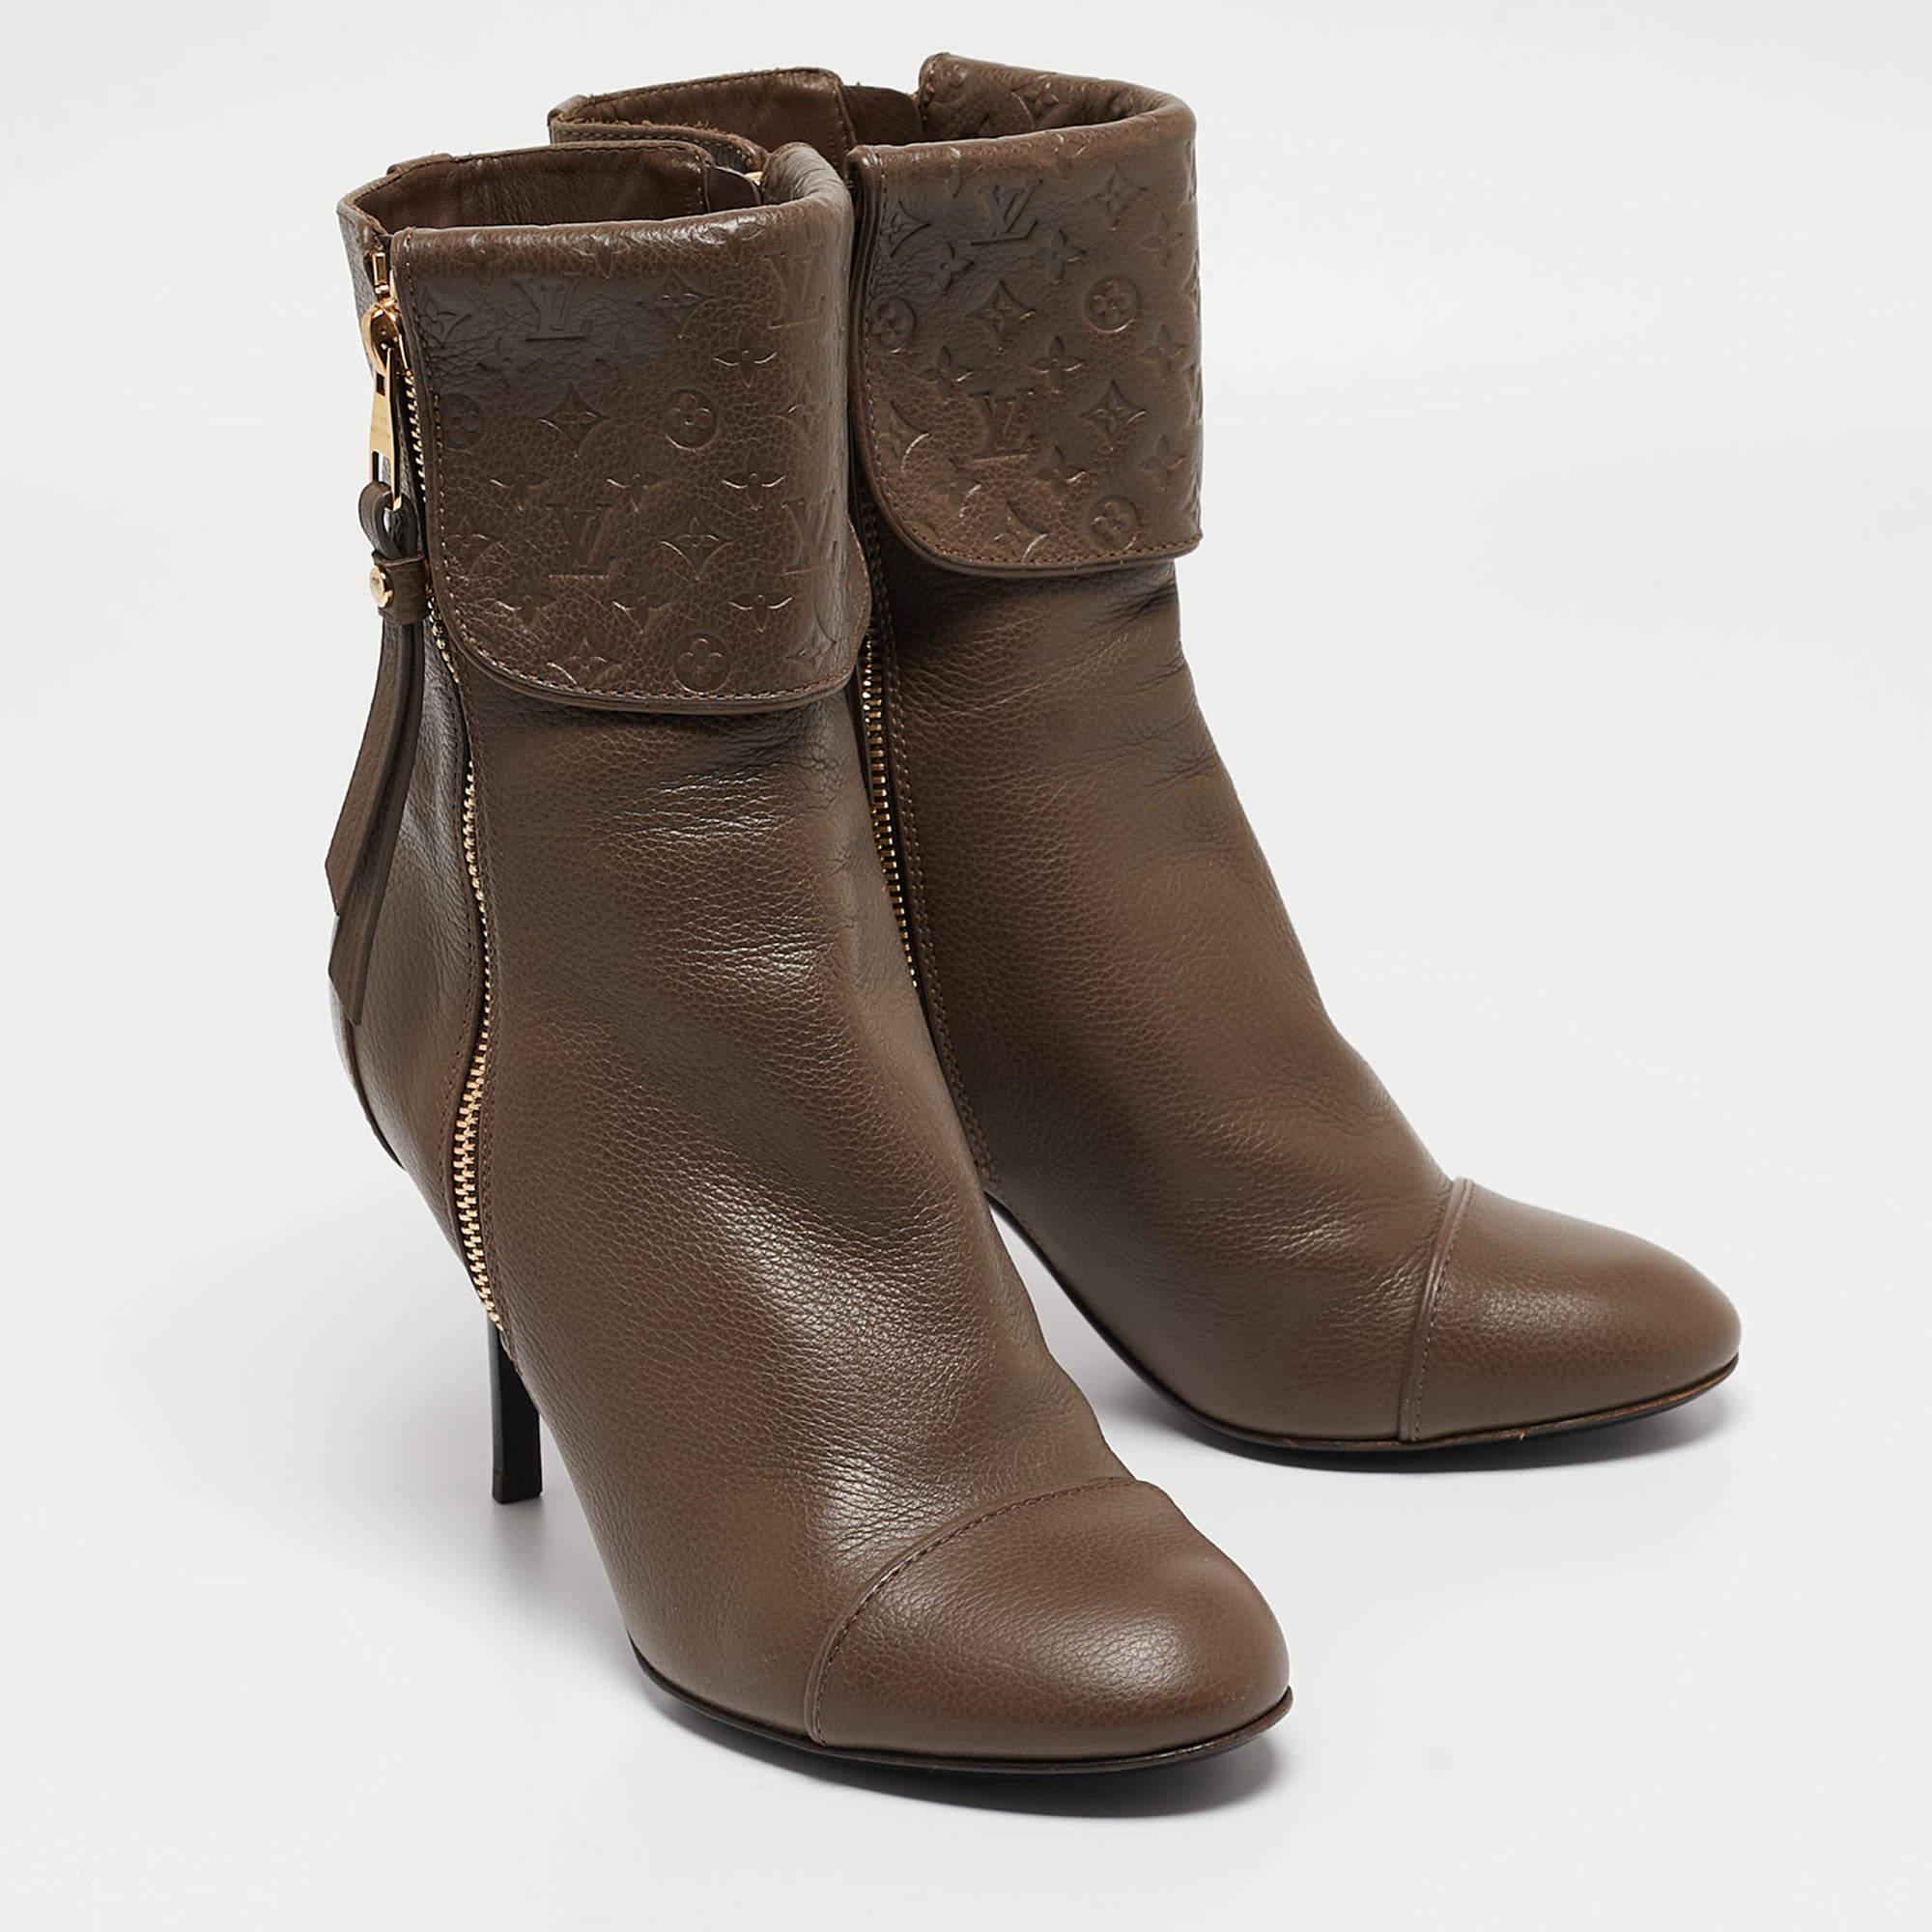 Enjoy the most fashionable days with these stylish boots. Modern in design and craftsmanship, they are fashioned to keep you comfortable and chic!

